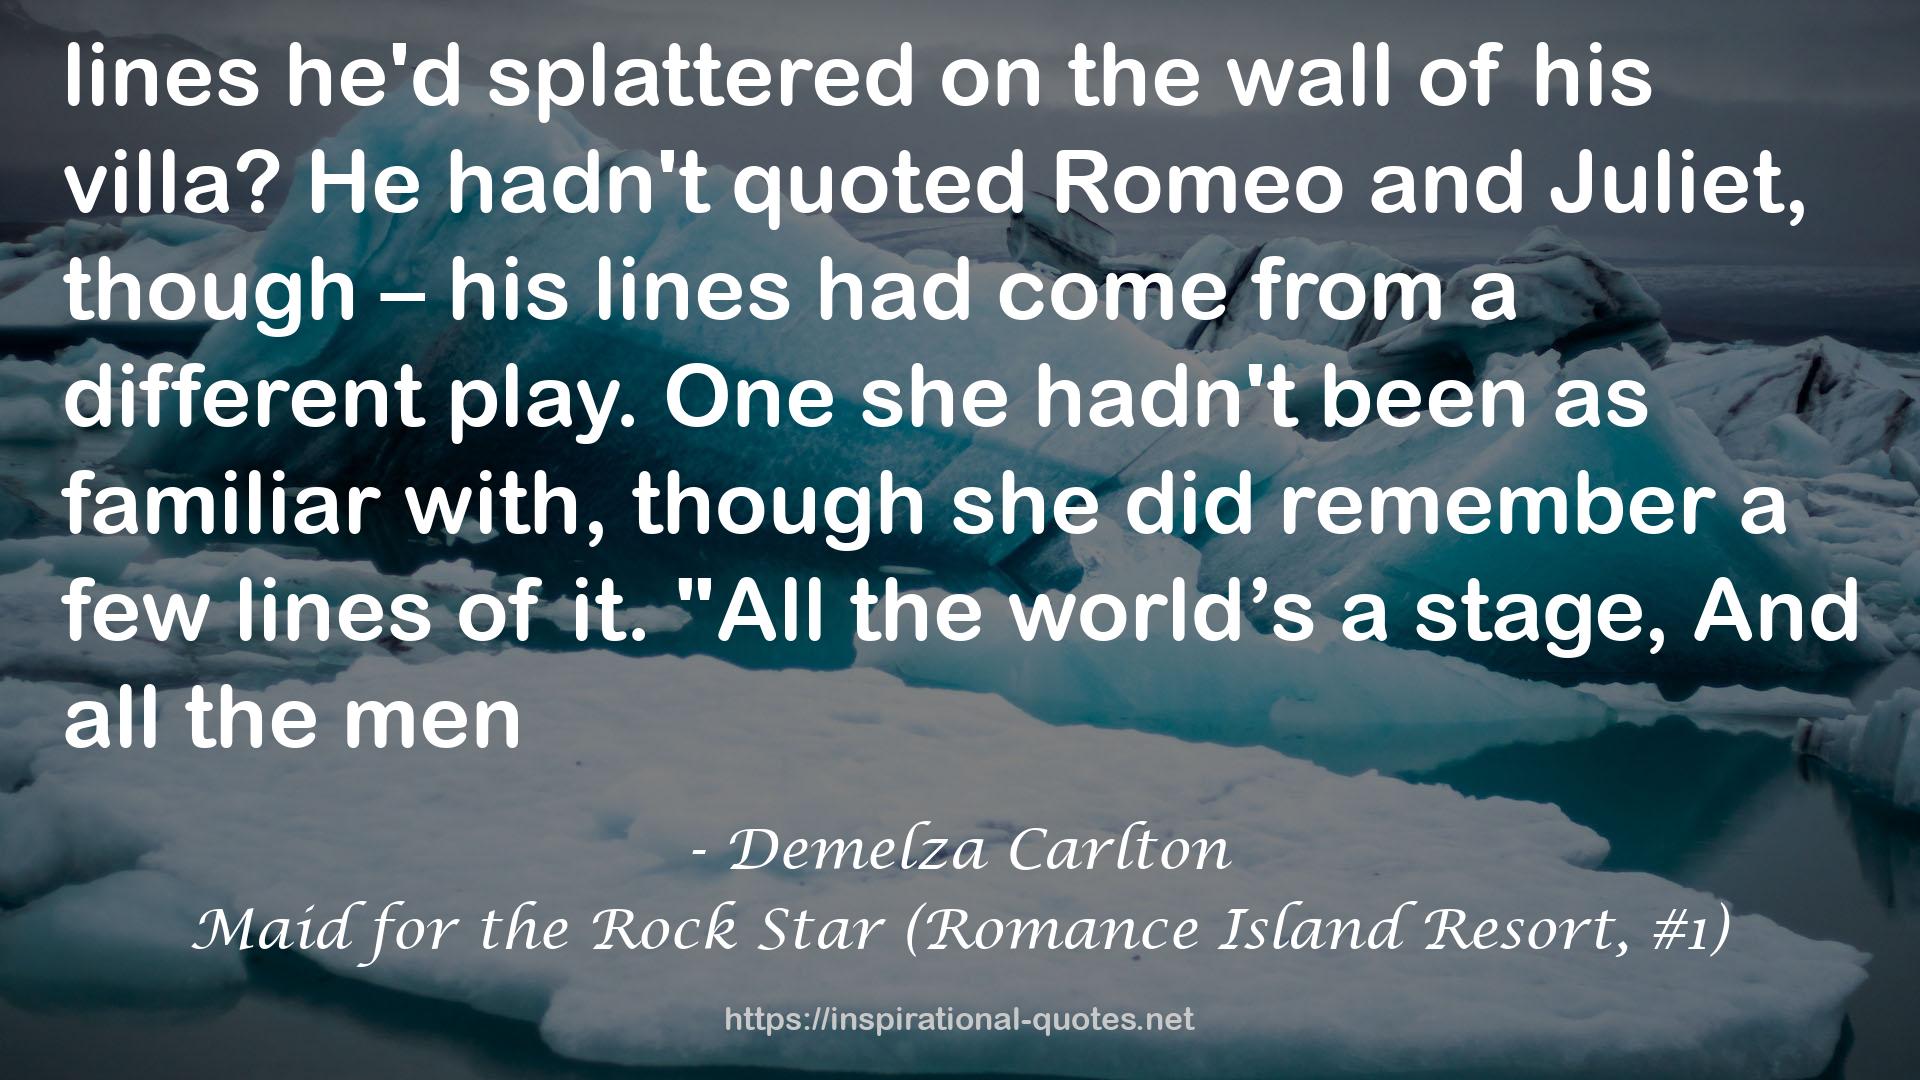 Maid for the Rock Star (Romance Island Resort, #1) QUOTES